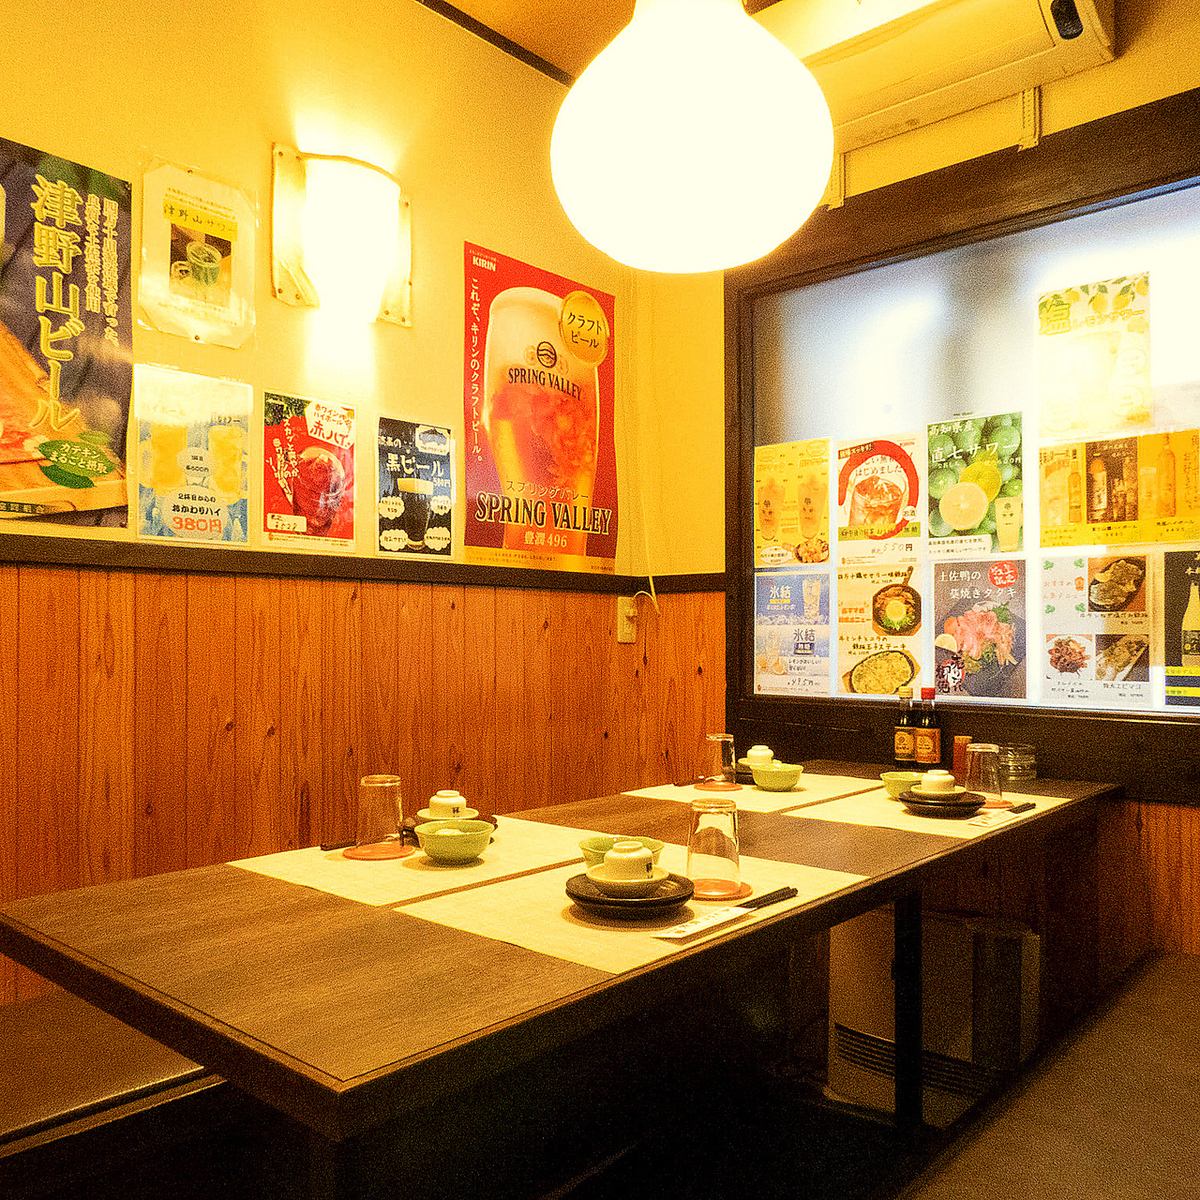 [Complete measures against infectious diseases] We have a complete private room for 2 people by reservation ♪